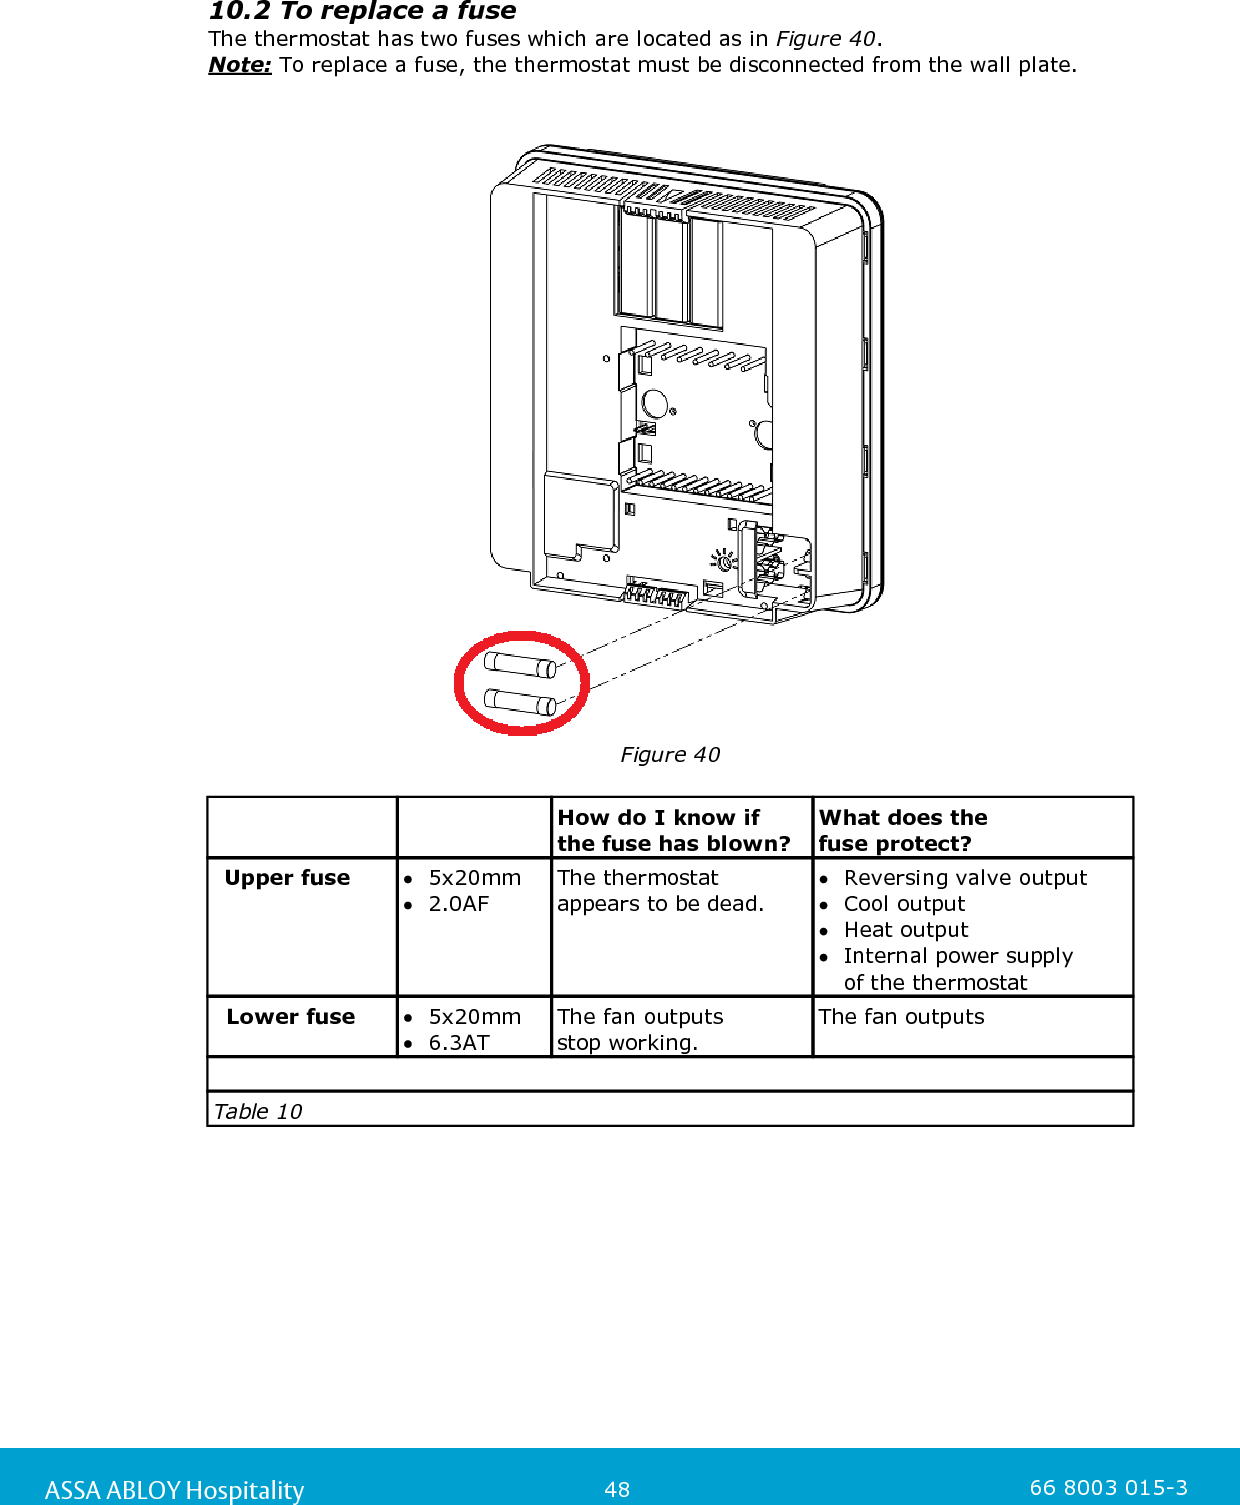 48ASSA ABLOY Hospitality 66 8003 015-310.2 To replace a fuseThe thermostat has two fuses which are located as in Figure 40. Note: To replace a fuse, the thermostat must be disconnected from the wall plate. Figure 40How do I know if the fuse has blown?What does the fuse protect?Upper fuse5x20mm2.0AFThe thermostat appears to be dead. Reversing valve outputCool outputHeat outputInternal power supply of the thermostatLower fuse5x20mm6.3ATThe fan outputs stop working. The fan outputsTable 10